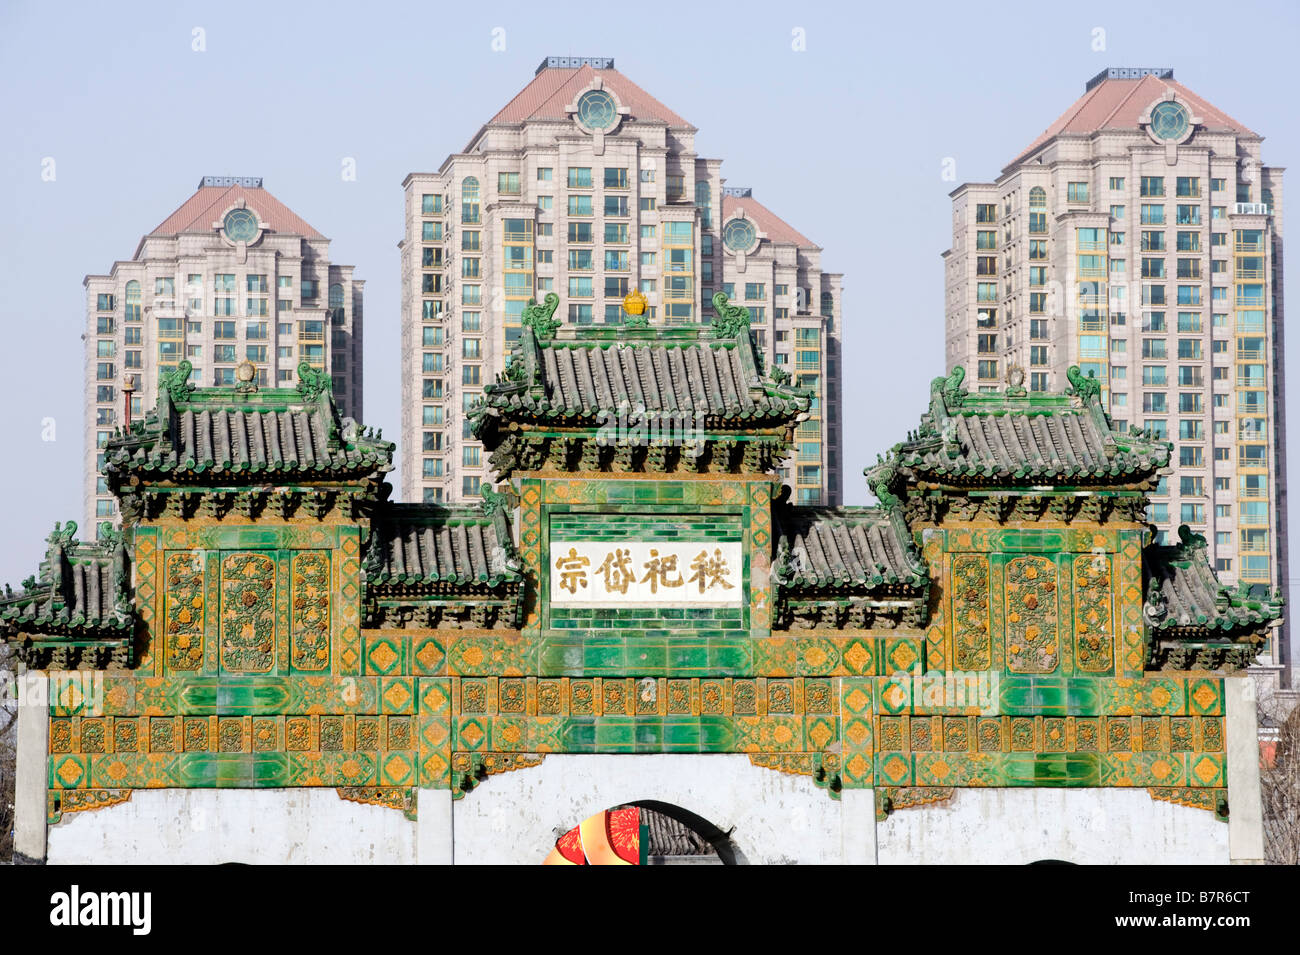 Contrast between ancient monument and modern high rise apartment buildings in central Beijing 2009 Stock Photo